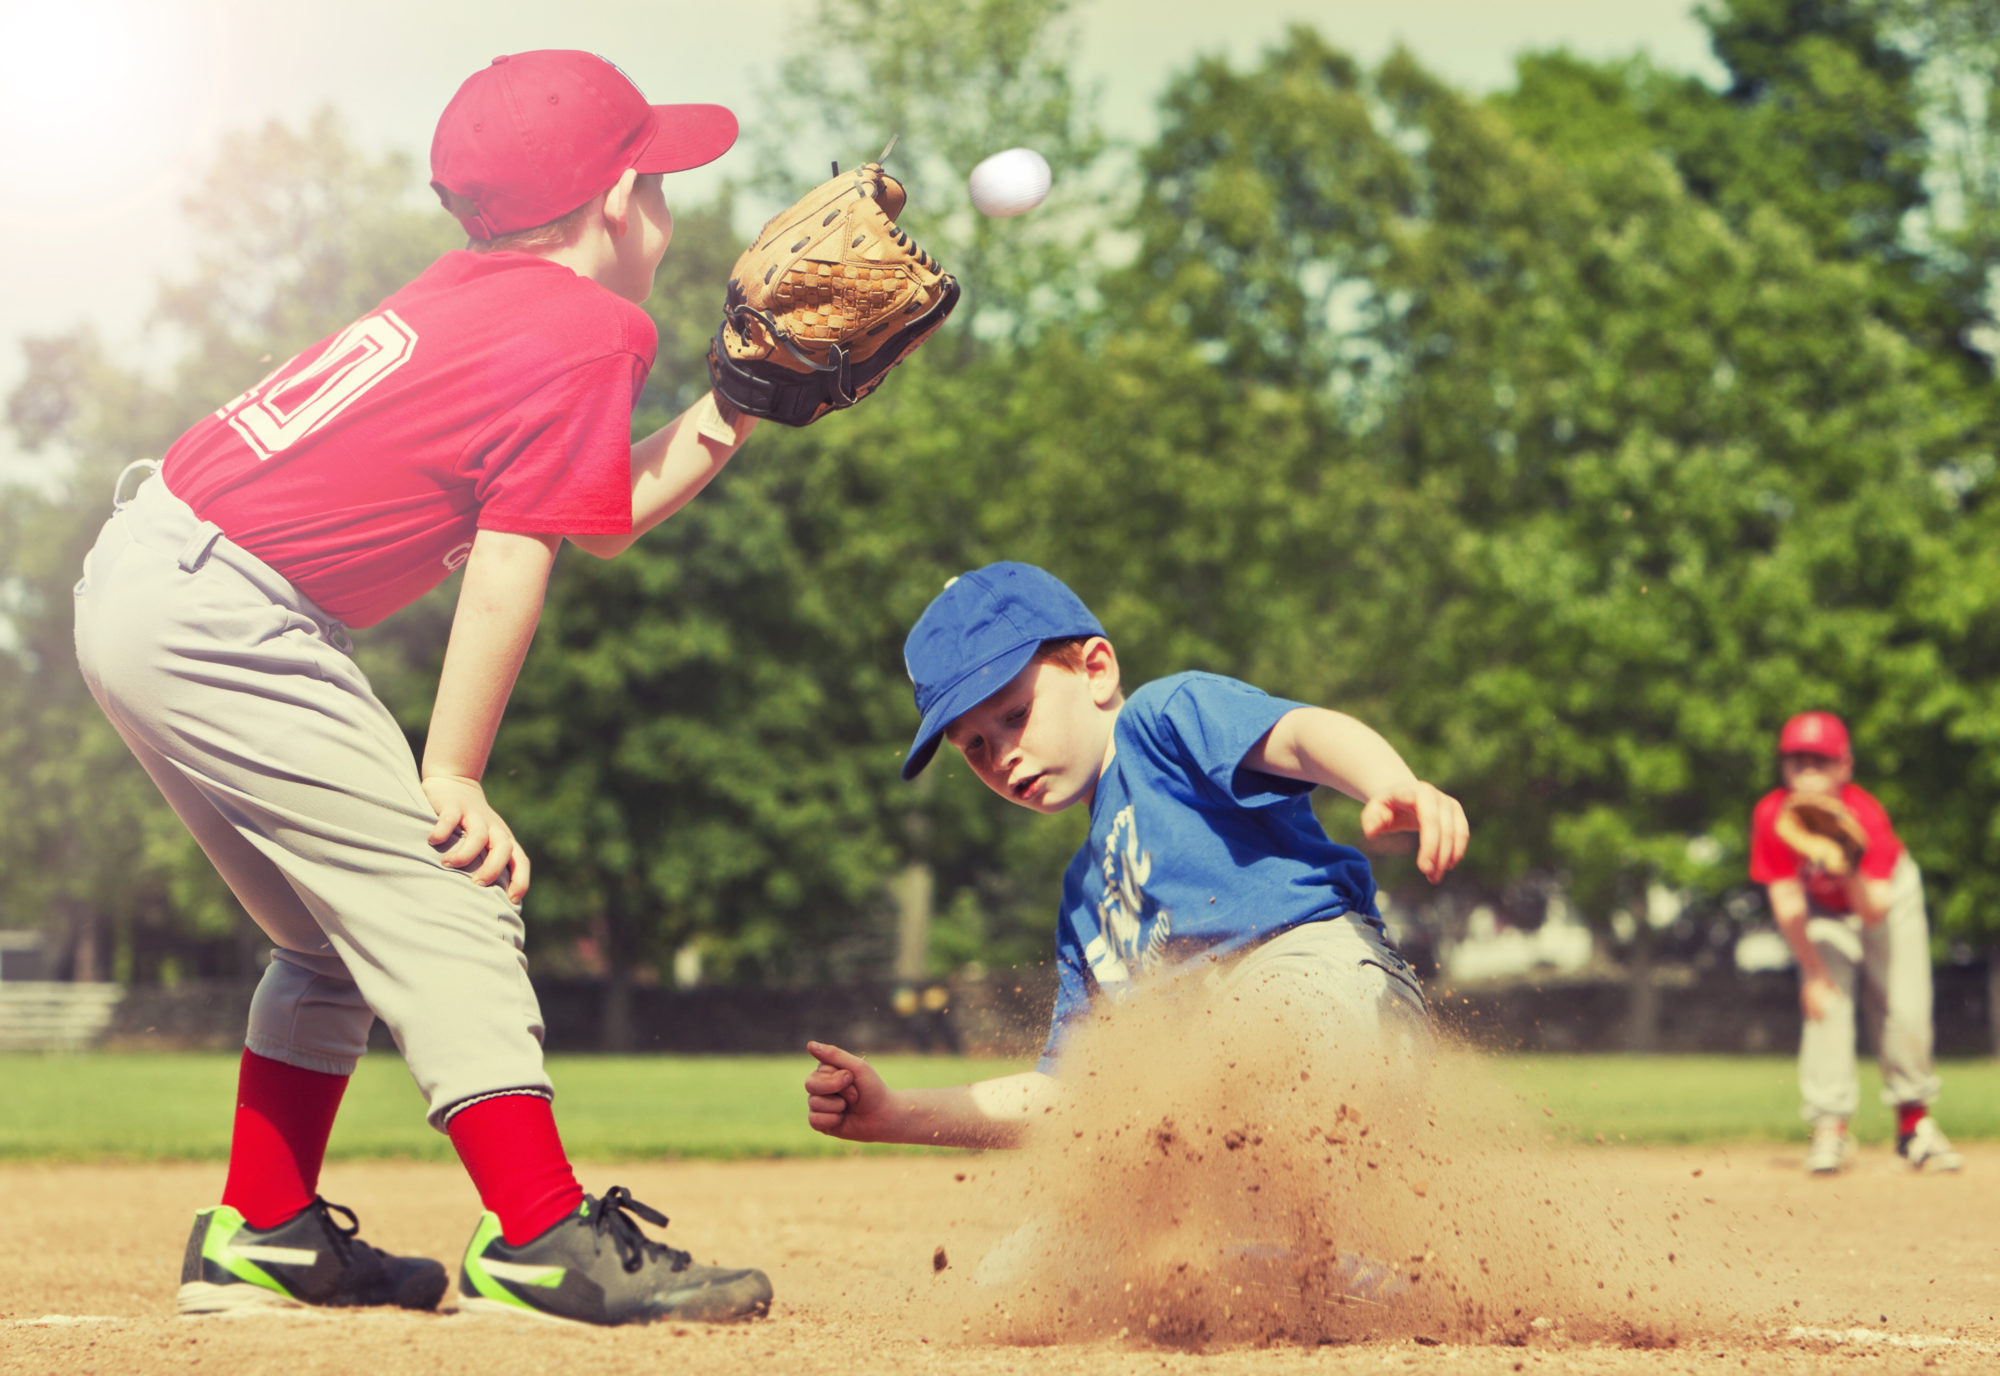 Youth Baseball Tournaments Are A Tradition In The Summer